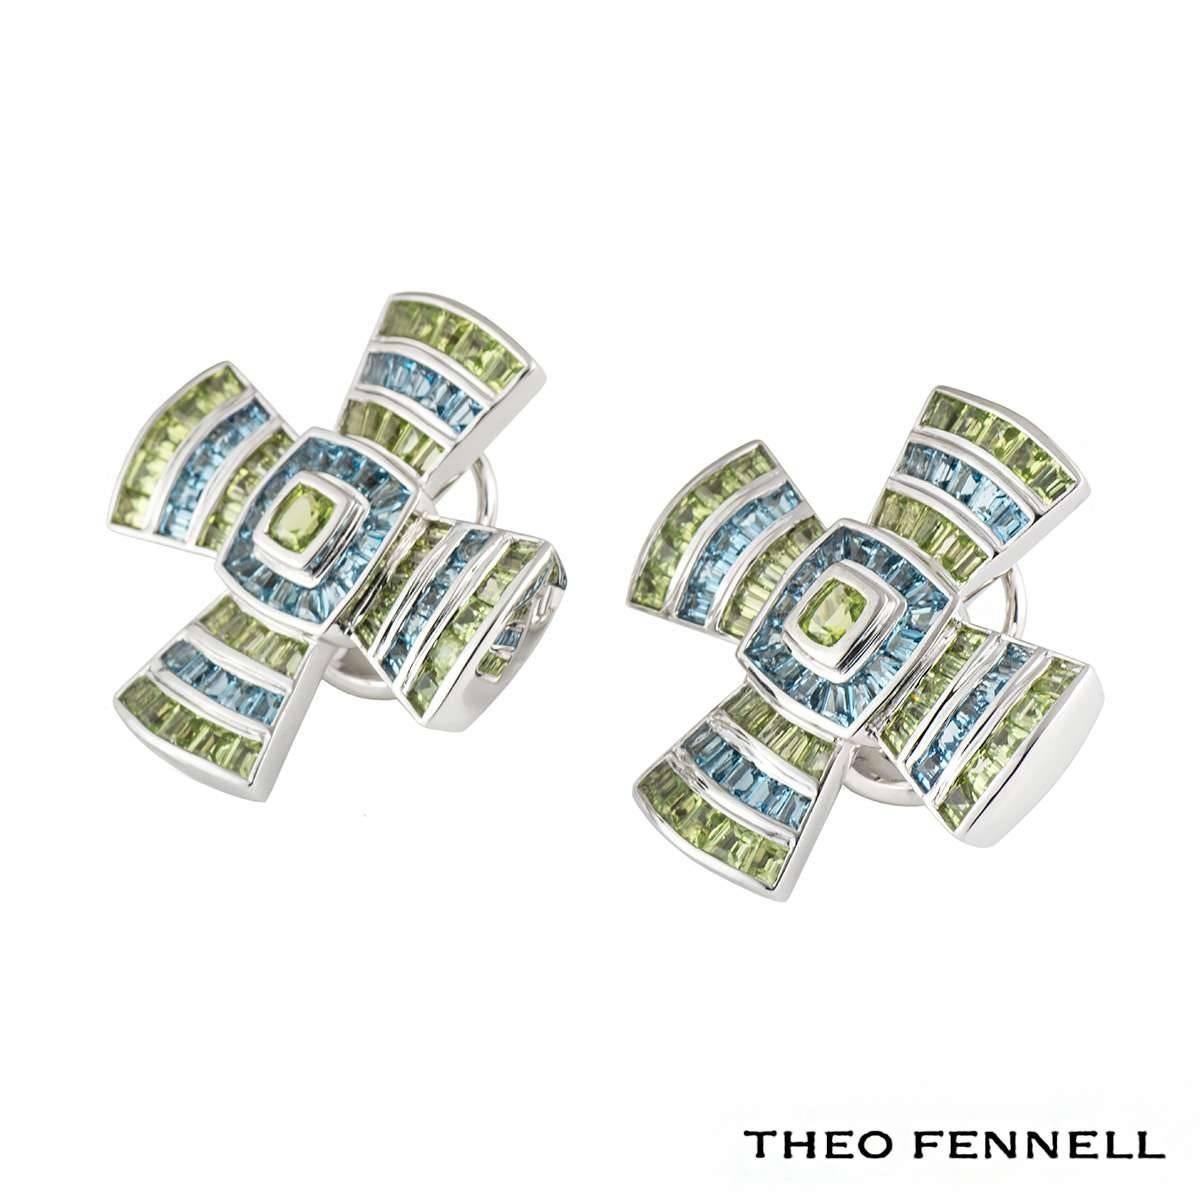 A Theo Fennell 18k white gold cross earrings. This pair of earrings is a byzantine style cross set with multi-gemstones. There are 36 blue topaz and 41 peridot gemstones totalling approximately 3.41ct. The earrings measure 3cm in height and 3cm in